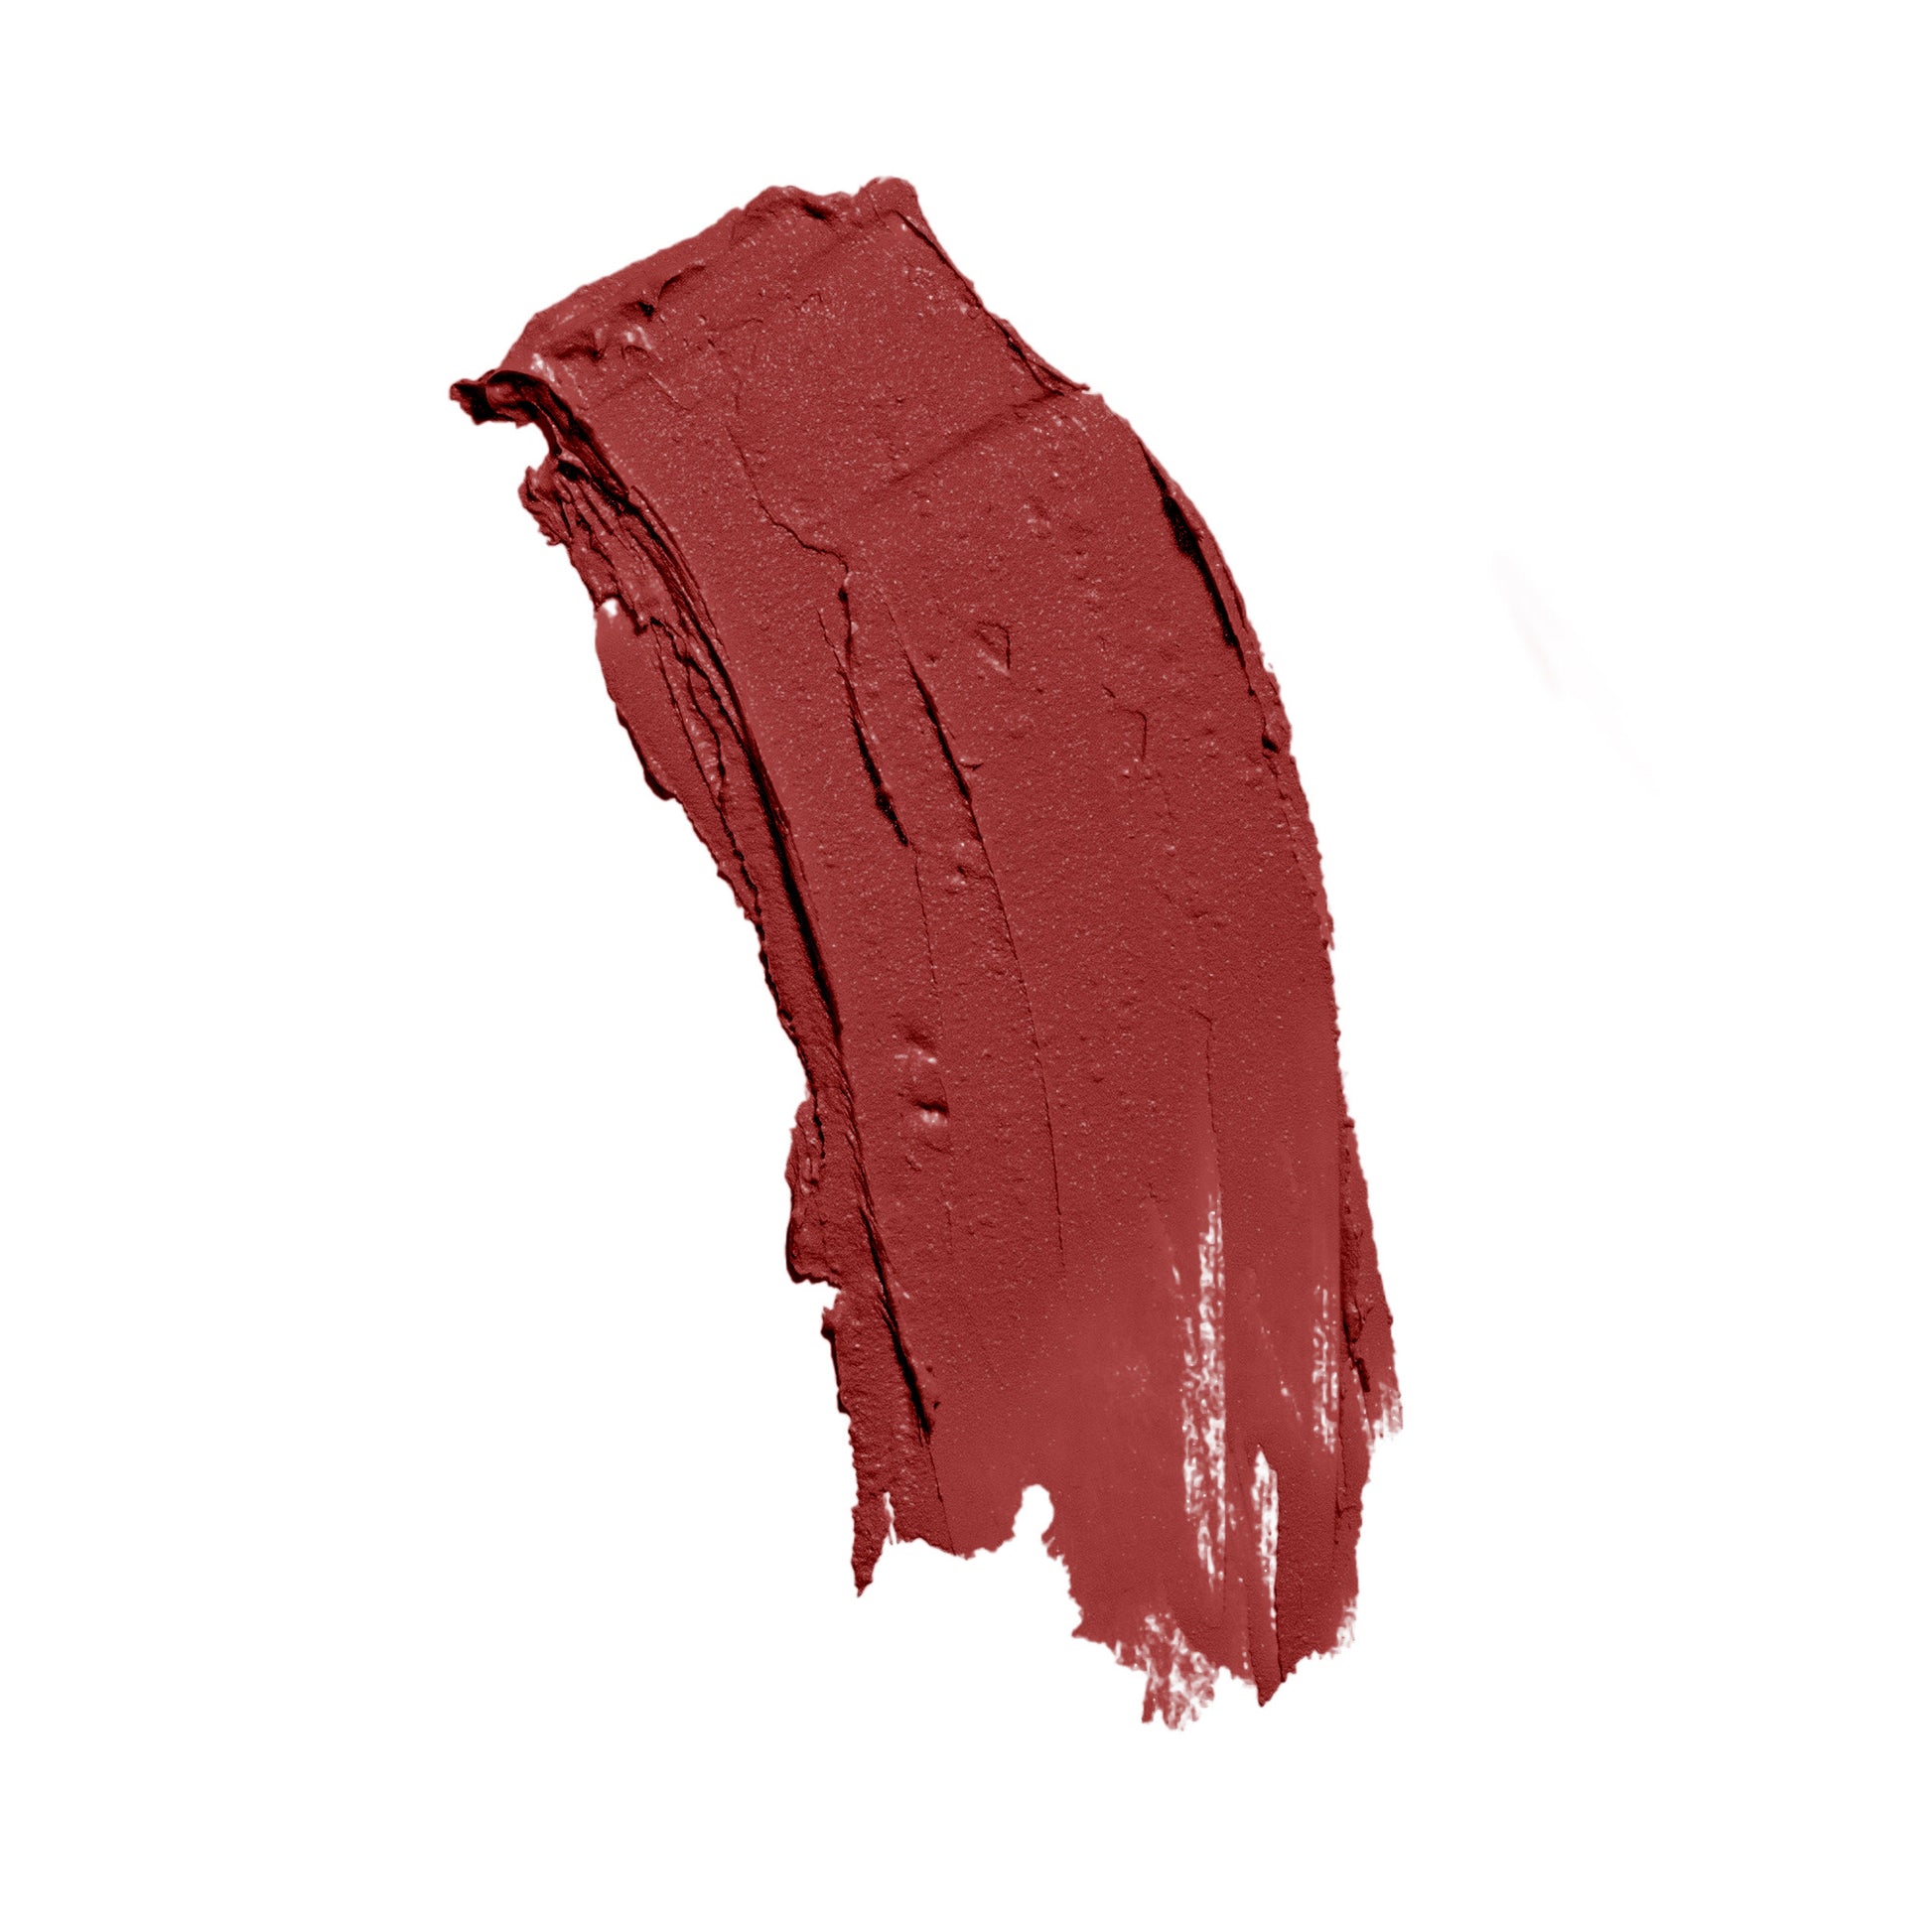 Close-up view of a Natural-Cruelty-Free satin brown lipstick against a white background